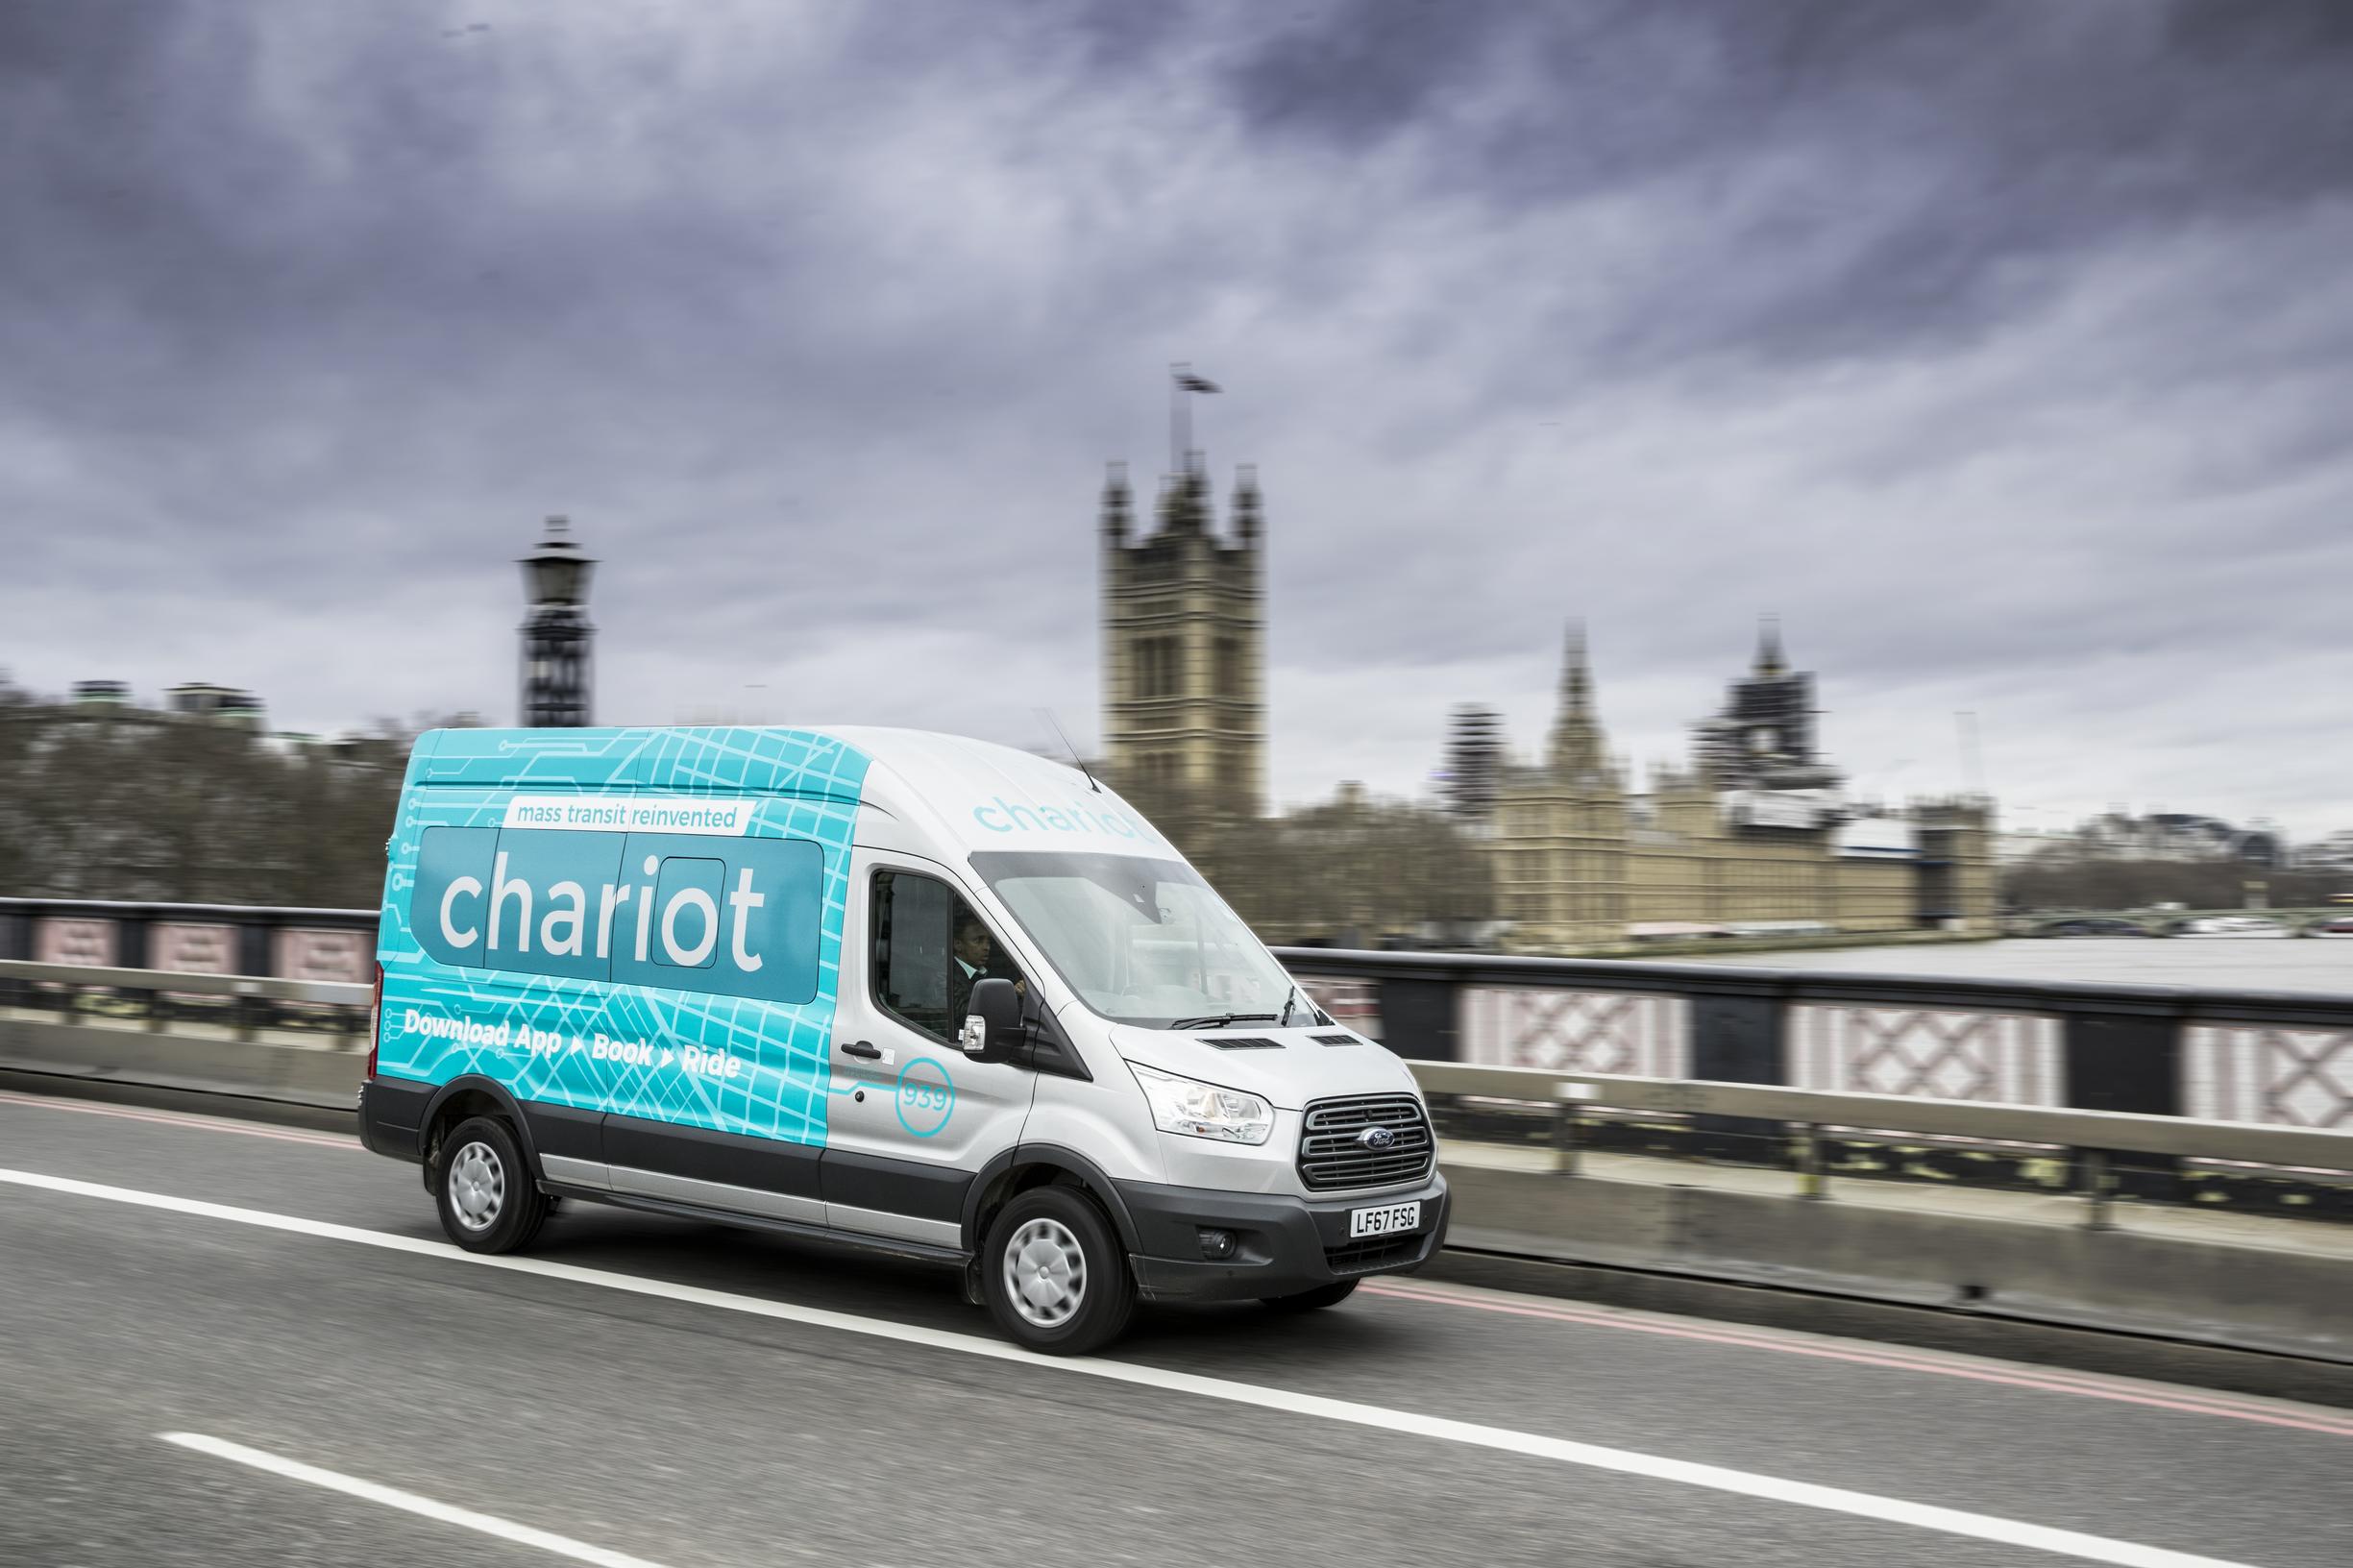 Chariot is designed for city dwellers who live in harder-to-serve areas where public transport is not easily accessible